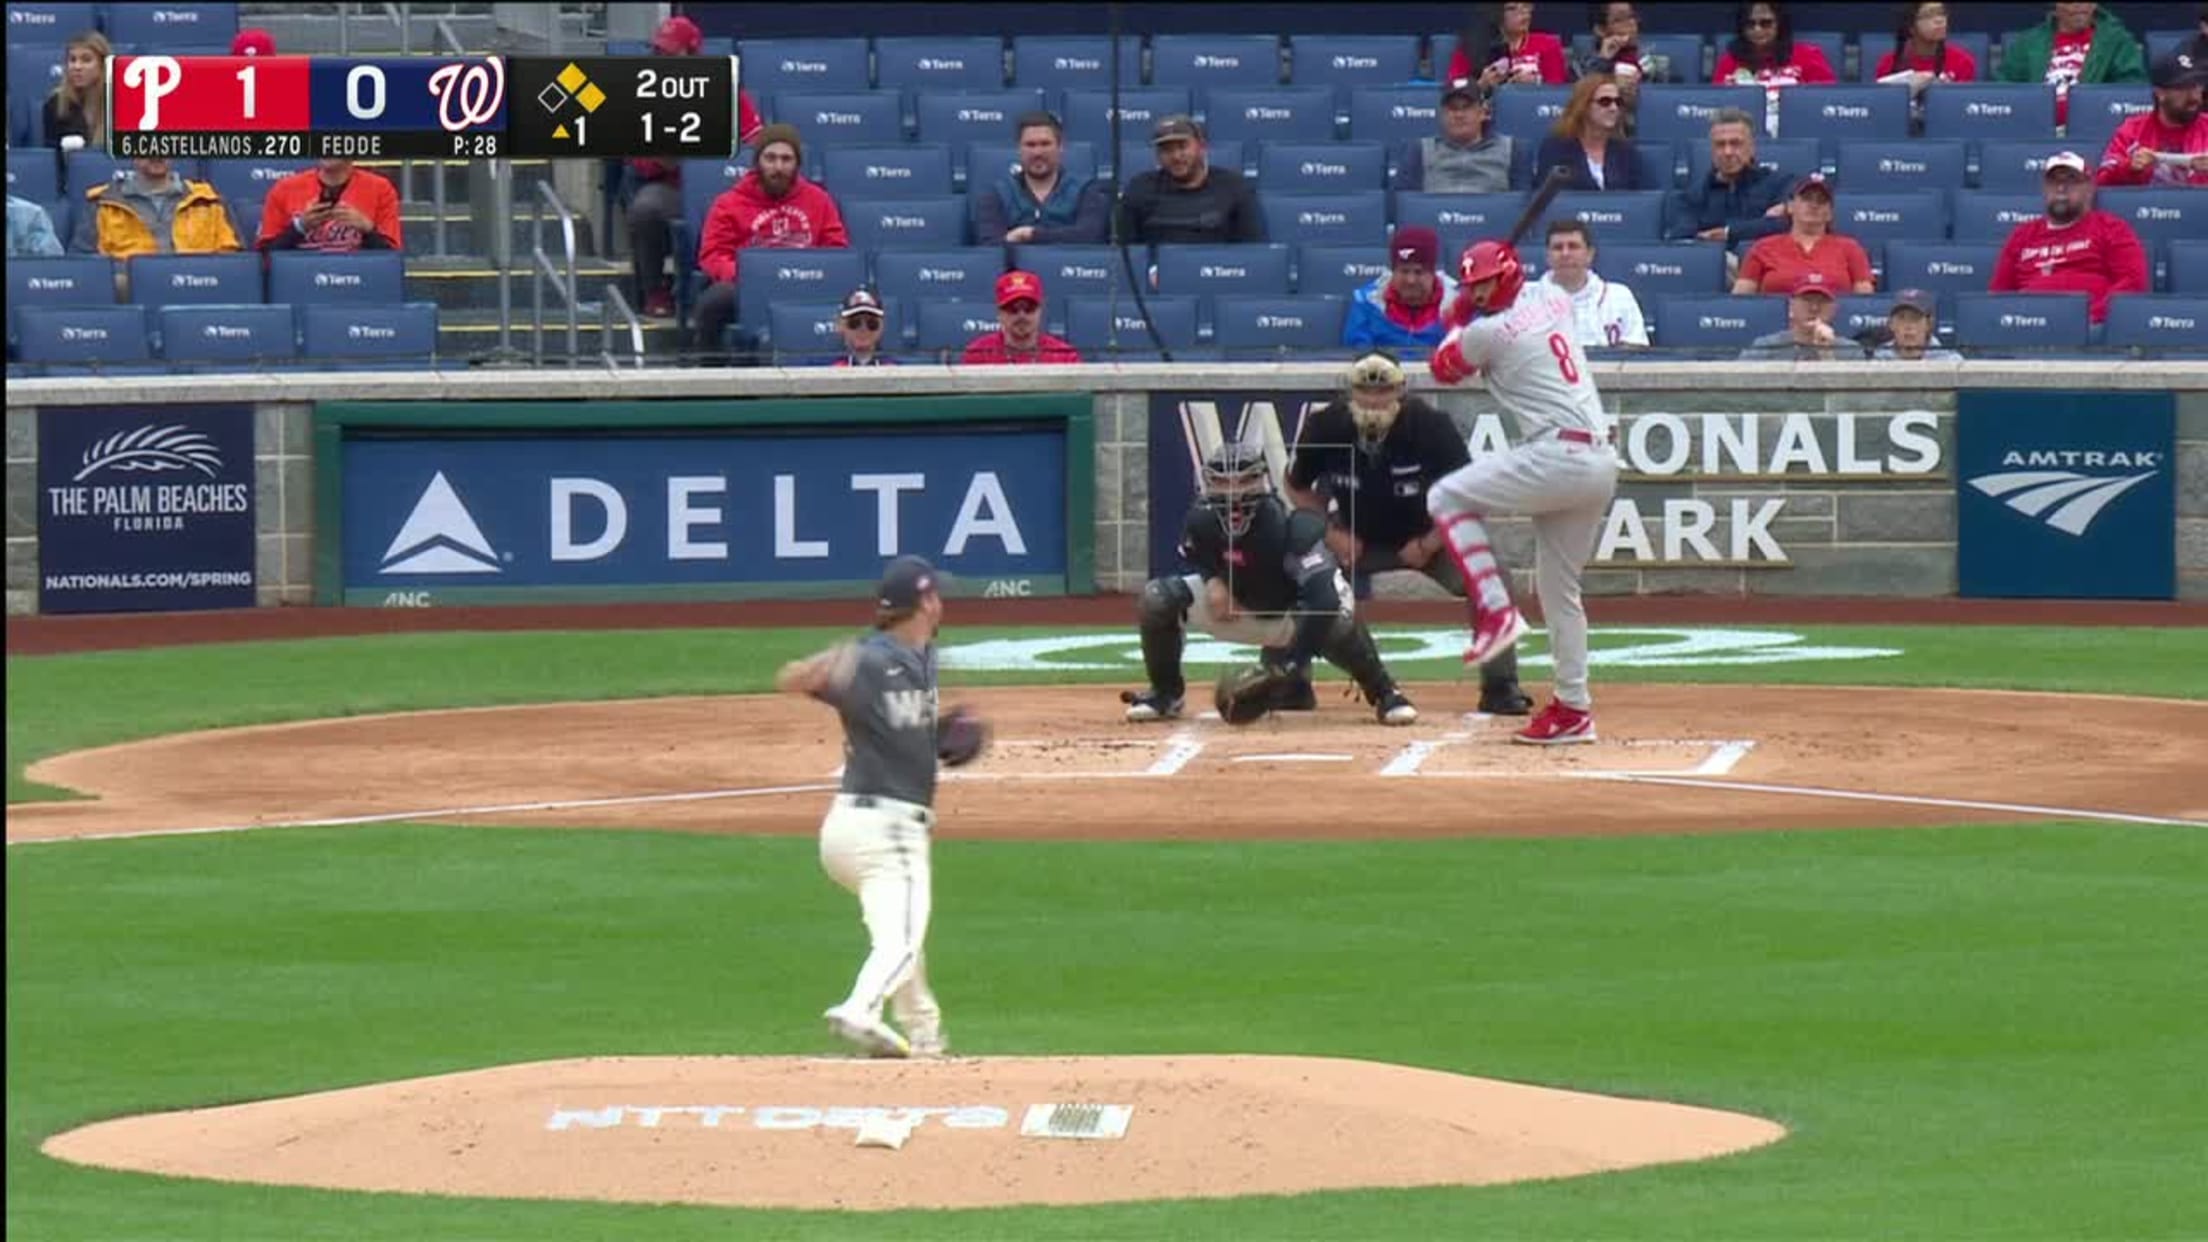 In a bizarre episode involving a pitch clock violation, Phillies catcher J.T.  Realmuto ejected from spring game - The Boston Globe